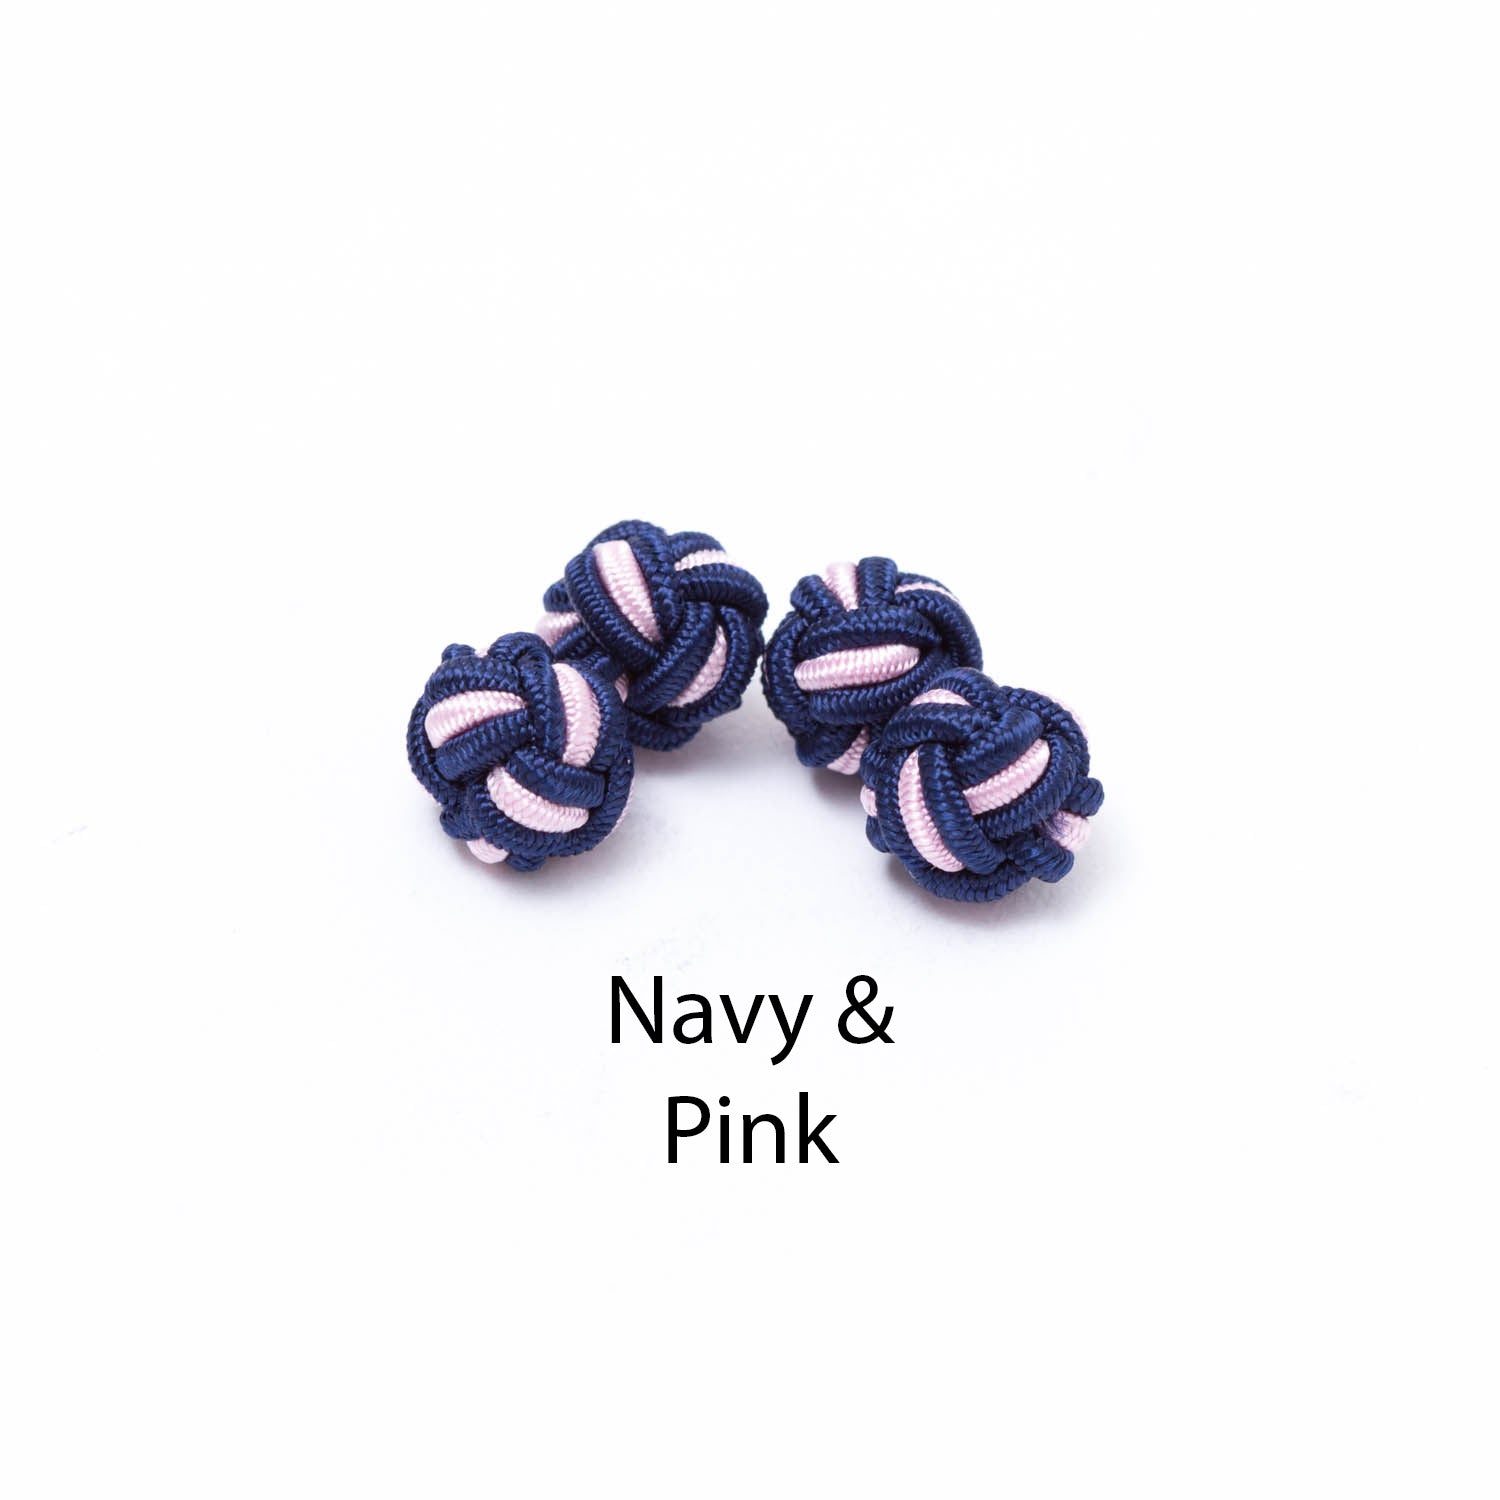 Navy & pink Dual Colored Knot Cufflinks for double-cuff shirts from KirbyAllison.com.